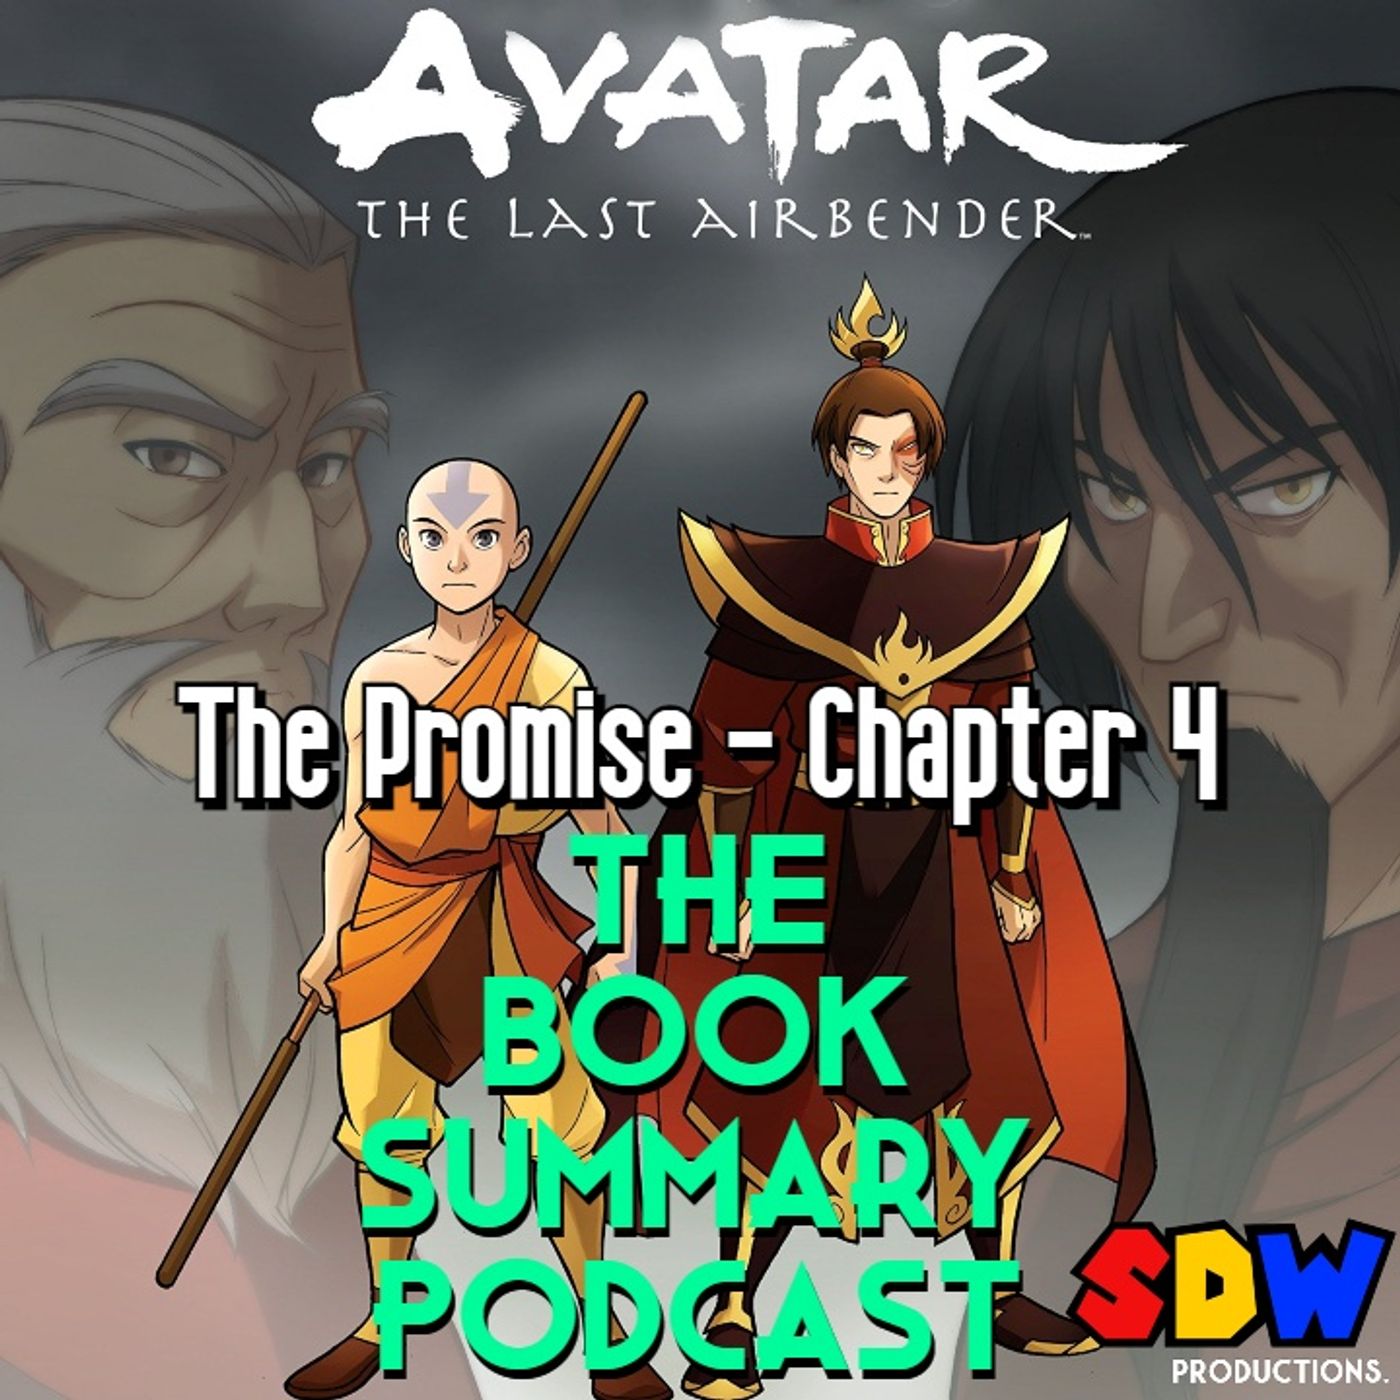 Avatar: The Last Airbender "The Promise" - Chapter 4